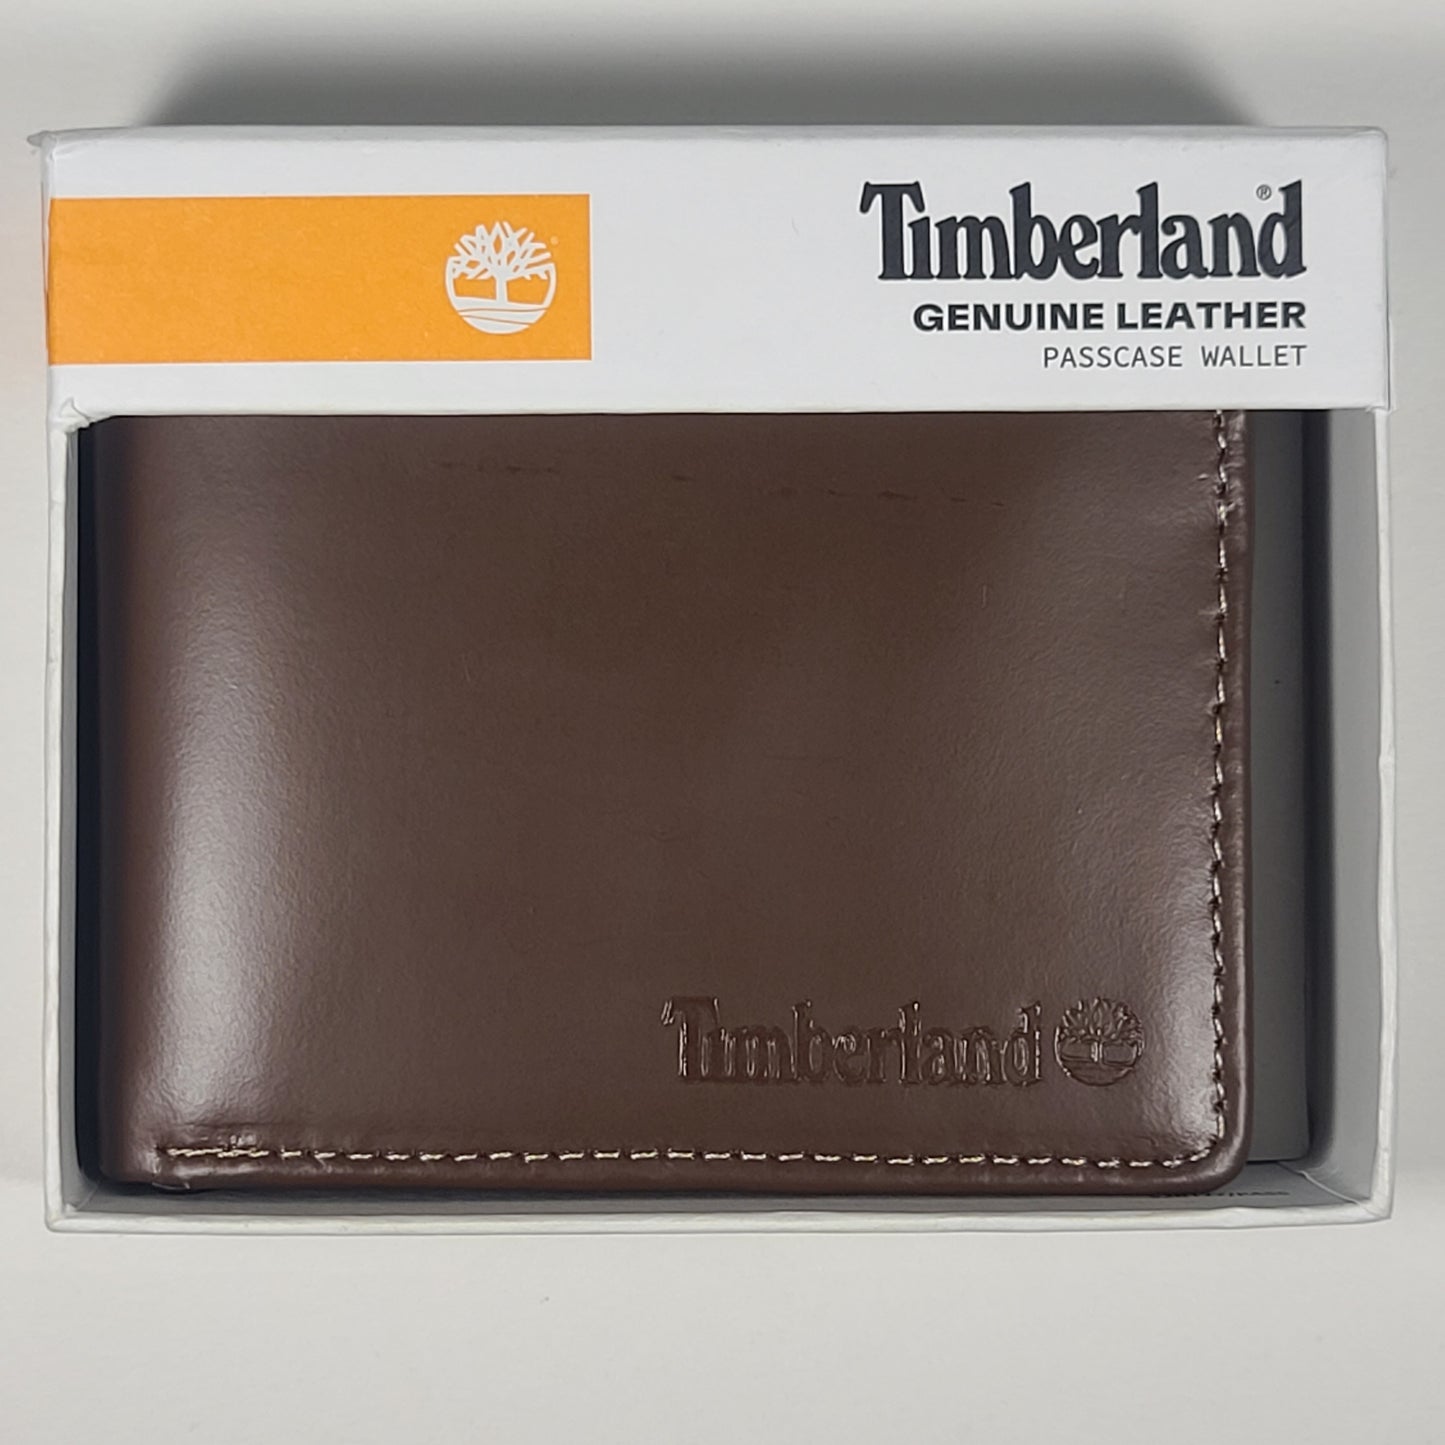 Timberland Men’s Bifold Light Brown Genuine Leather Passcase Wallet NP0695/21 - Wallets